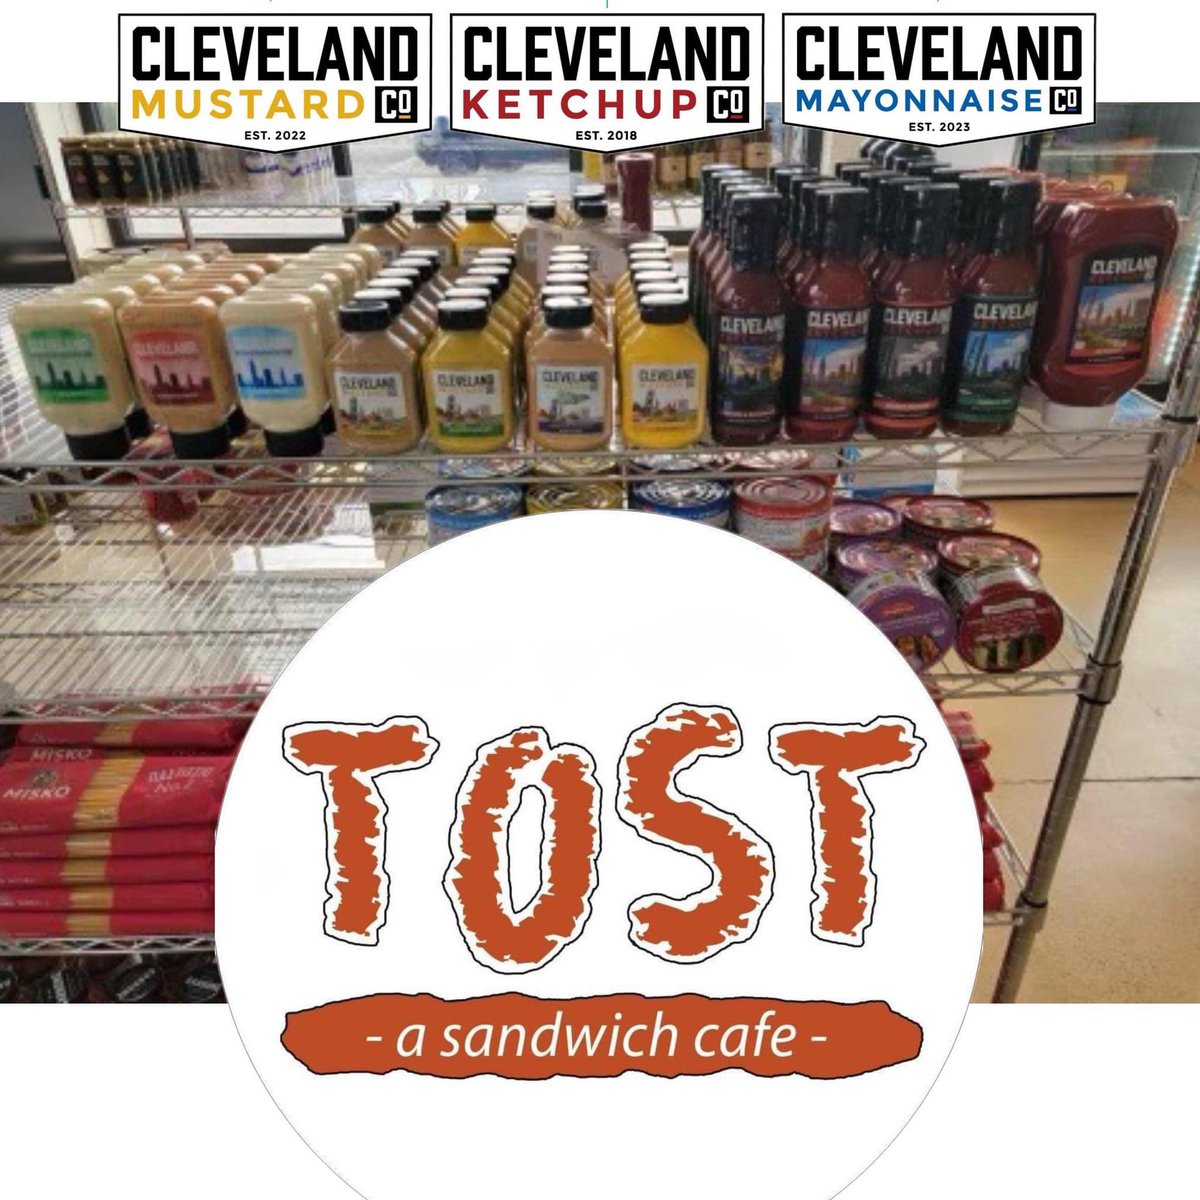 Thank you TOST - a sandwich cafe located Lakewood and Tremont. Amazing food as well as the The Finest Condiments In The Land! ♥️💛💙

#tostasandwichcafe #clevelandketchup #clevelandmustard #clevelandmayo #ohiolove